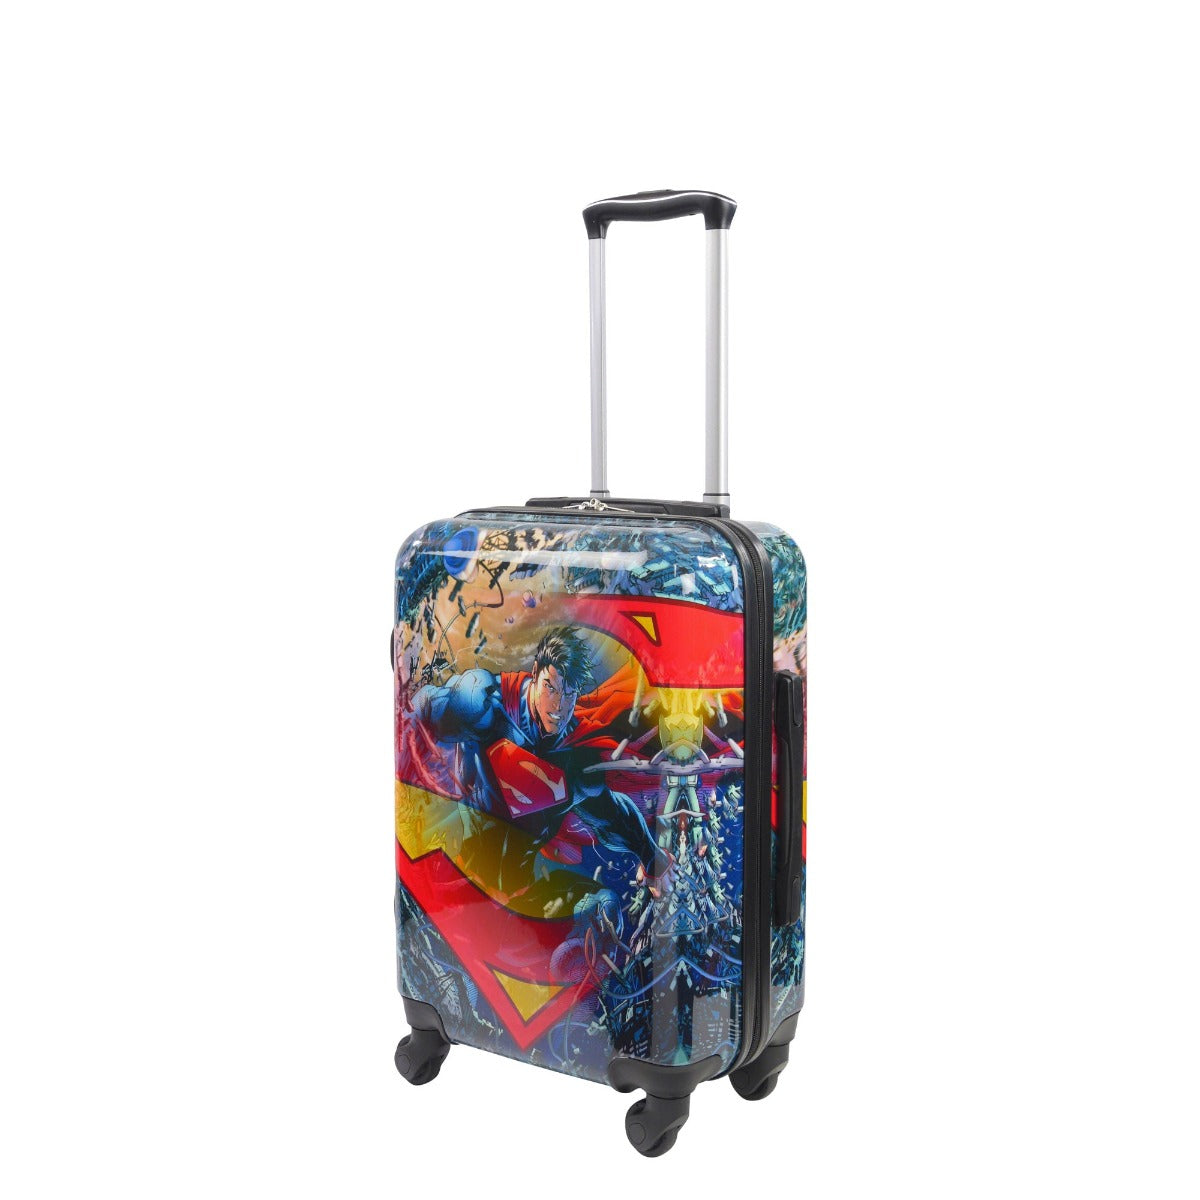 DC Comics Superman 21" hardside spinner suitcase luggage - best kids carry on suitcases for travel